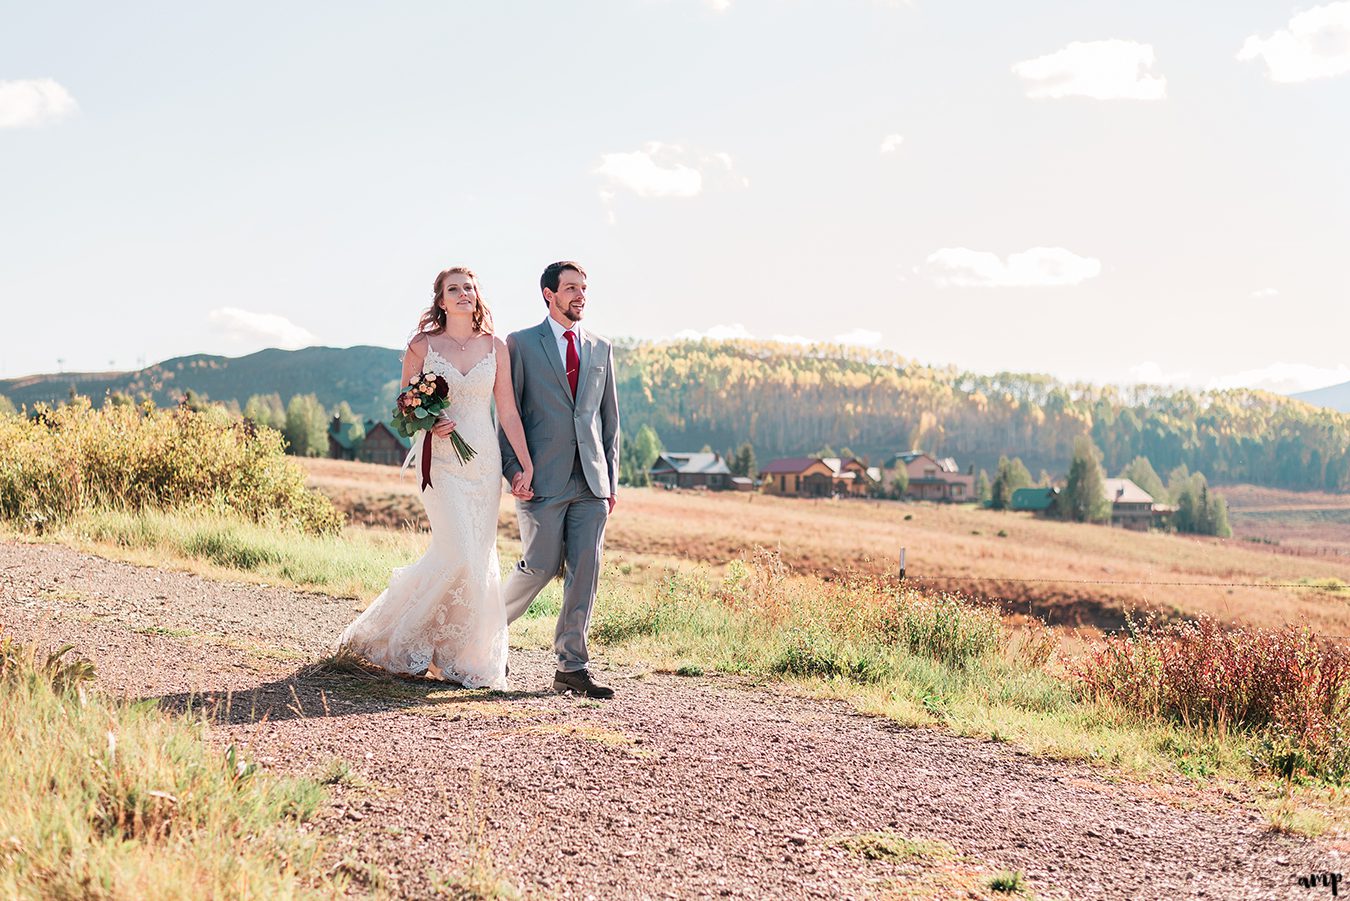 Bride and groom walk through the fall foliage at their Fall Wedding in Crested Butte at the Mountain Wedding Garden | amanda.matilda.photography